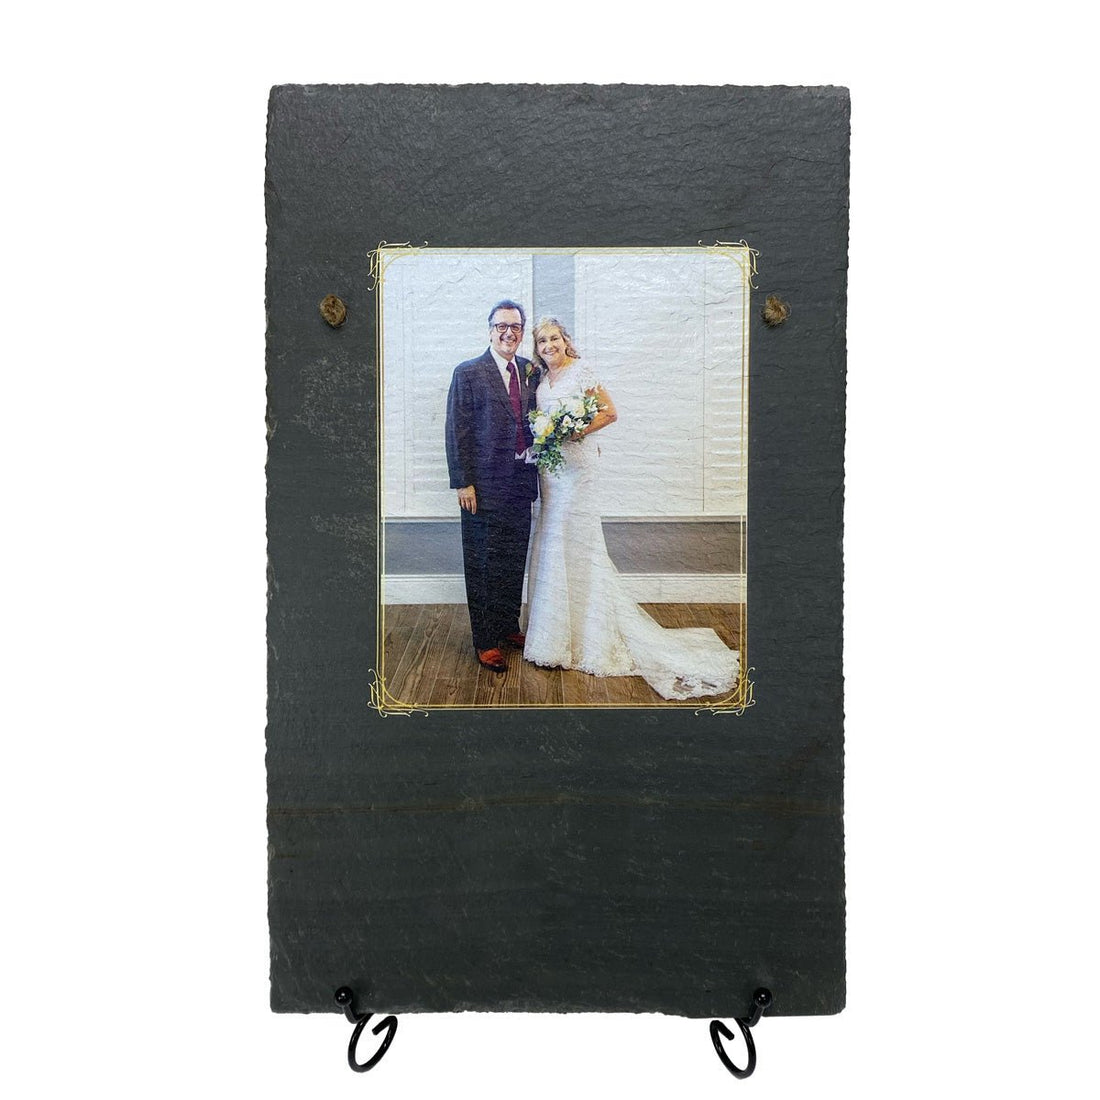 Printed Image (Portrait Format) and Text on 9.75"x15.75" Beautiful Charcoal Slate 